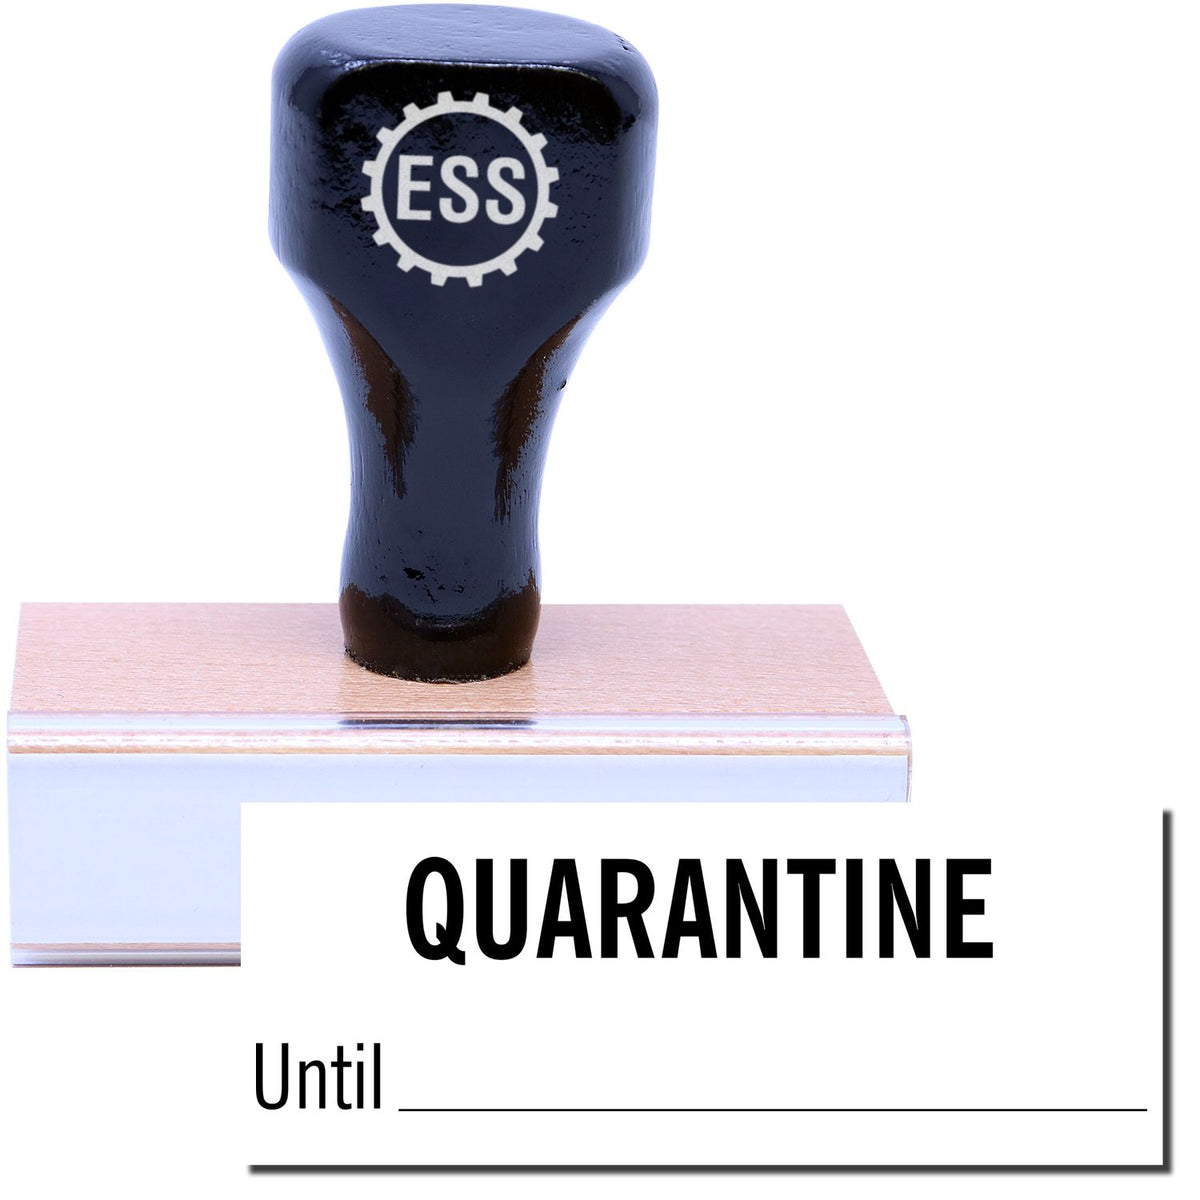 A stock office rubber stamp with a stamped image showing how the text &quot;QUARANTINE Until&quot; in a large font with a line is displayed after stamping.